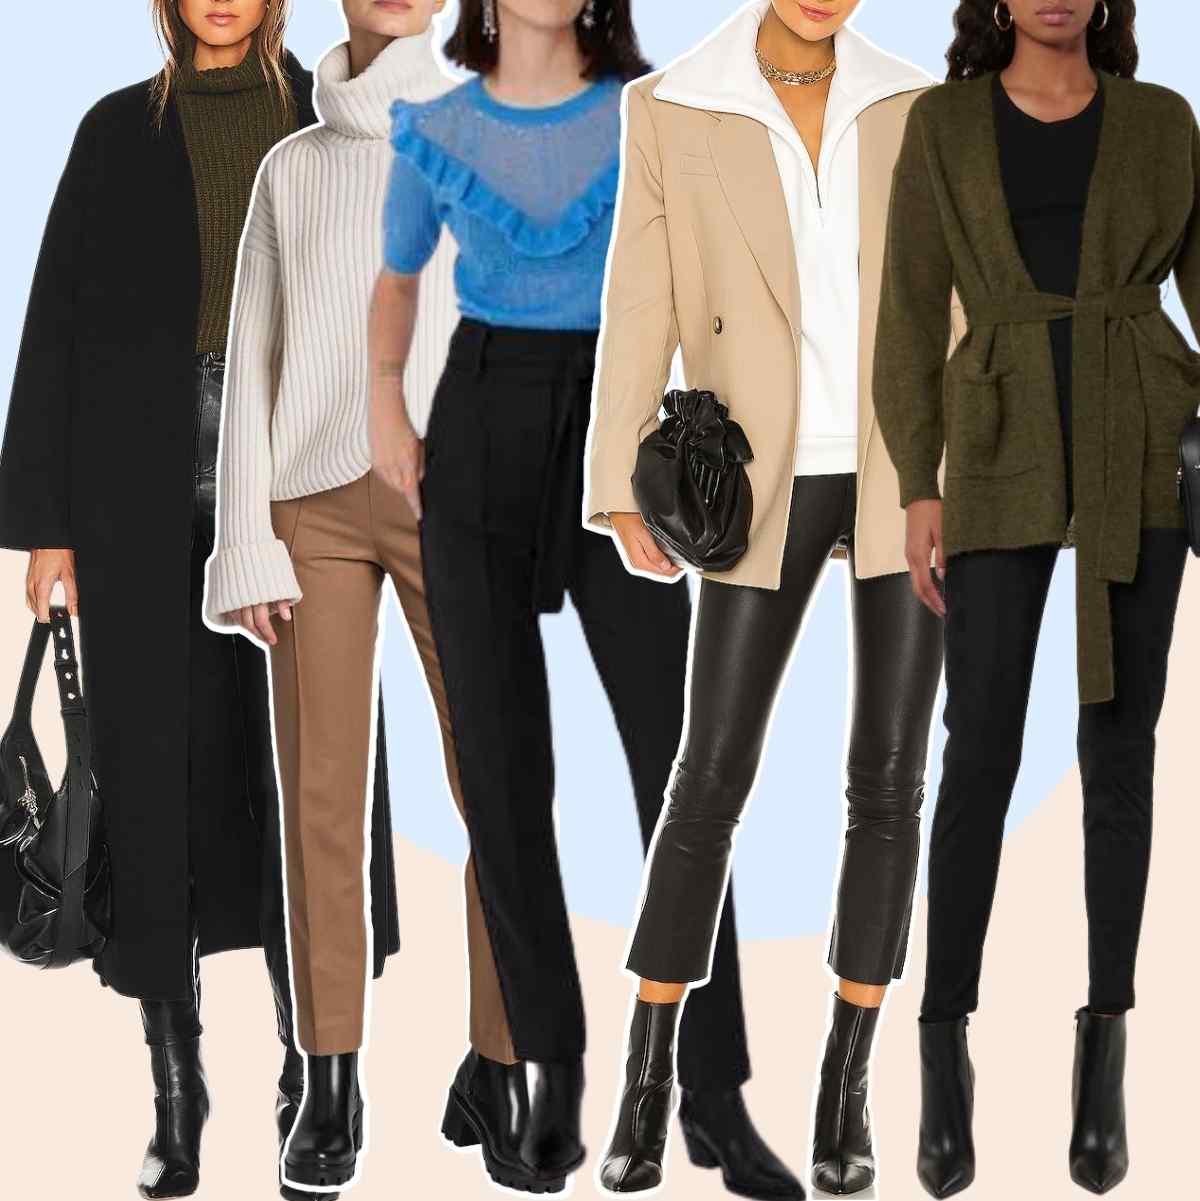 How to Style Business Casual Pants With Boots in the Winter